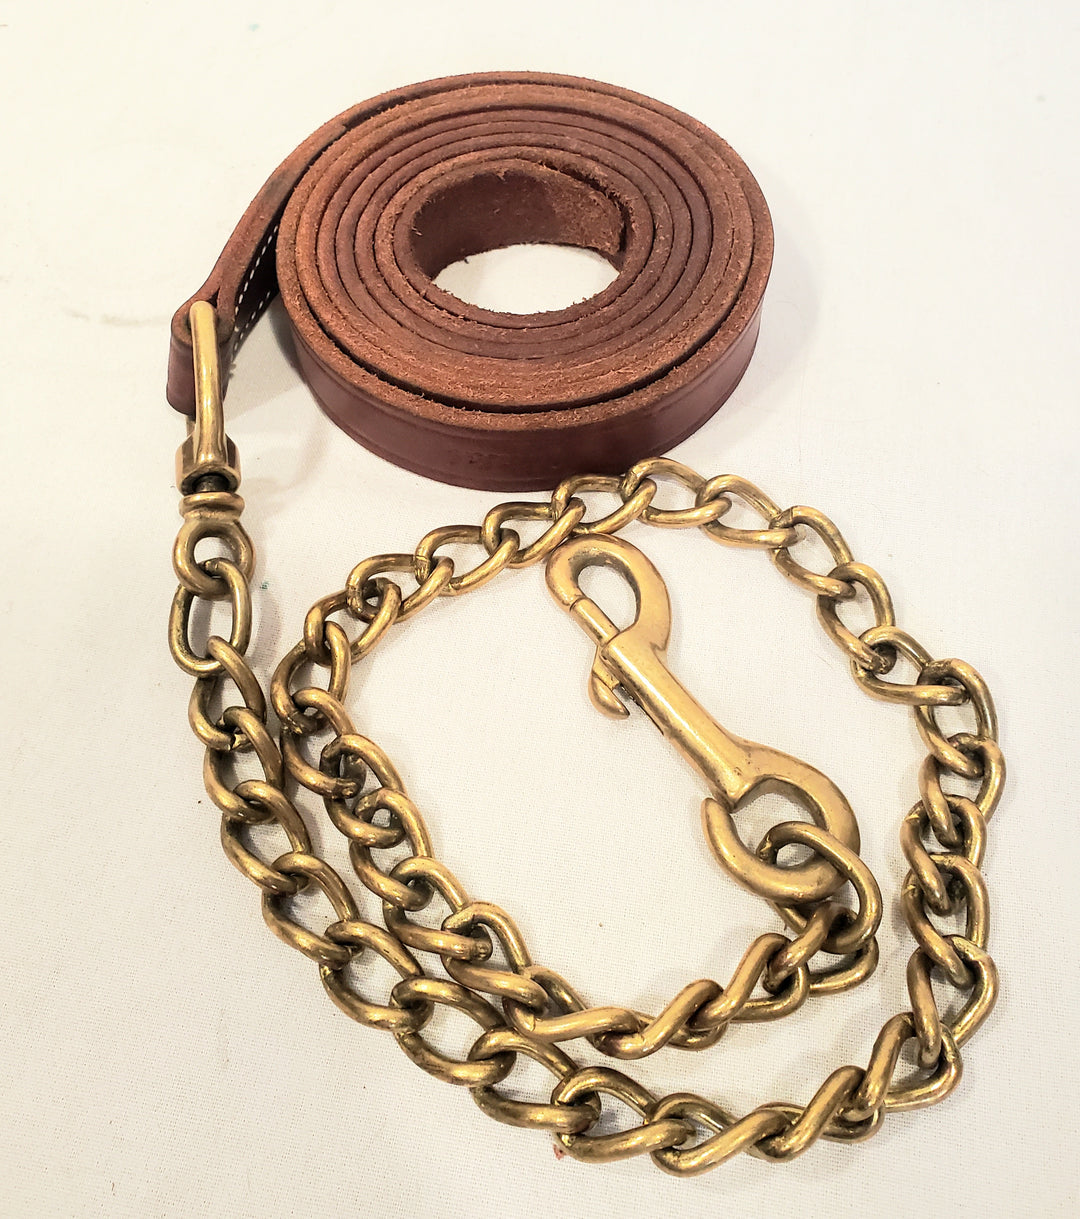 Walsh Leather Lead with Chain - New!